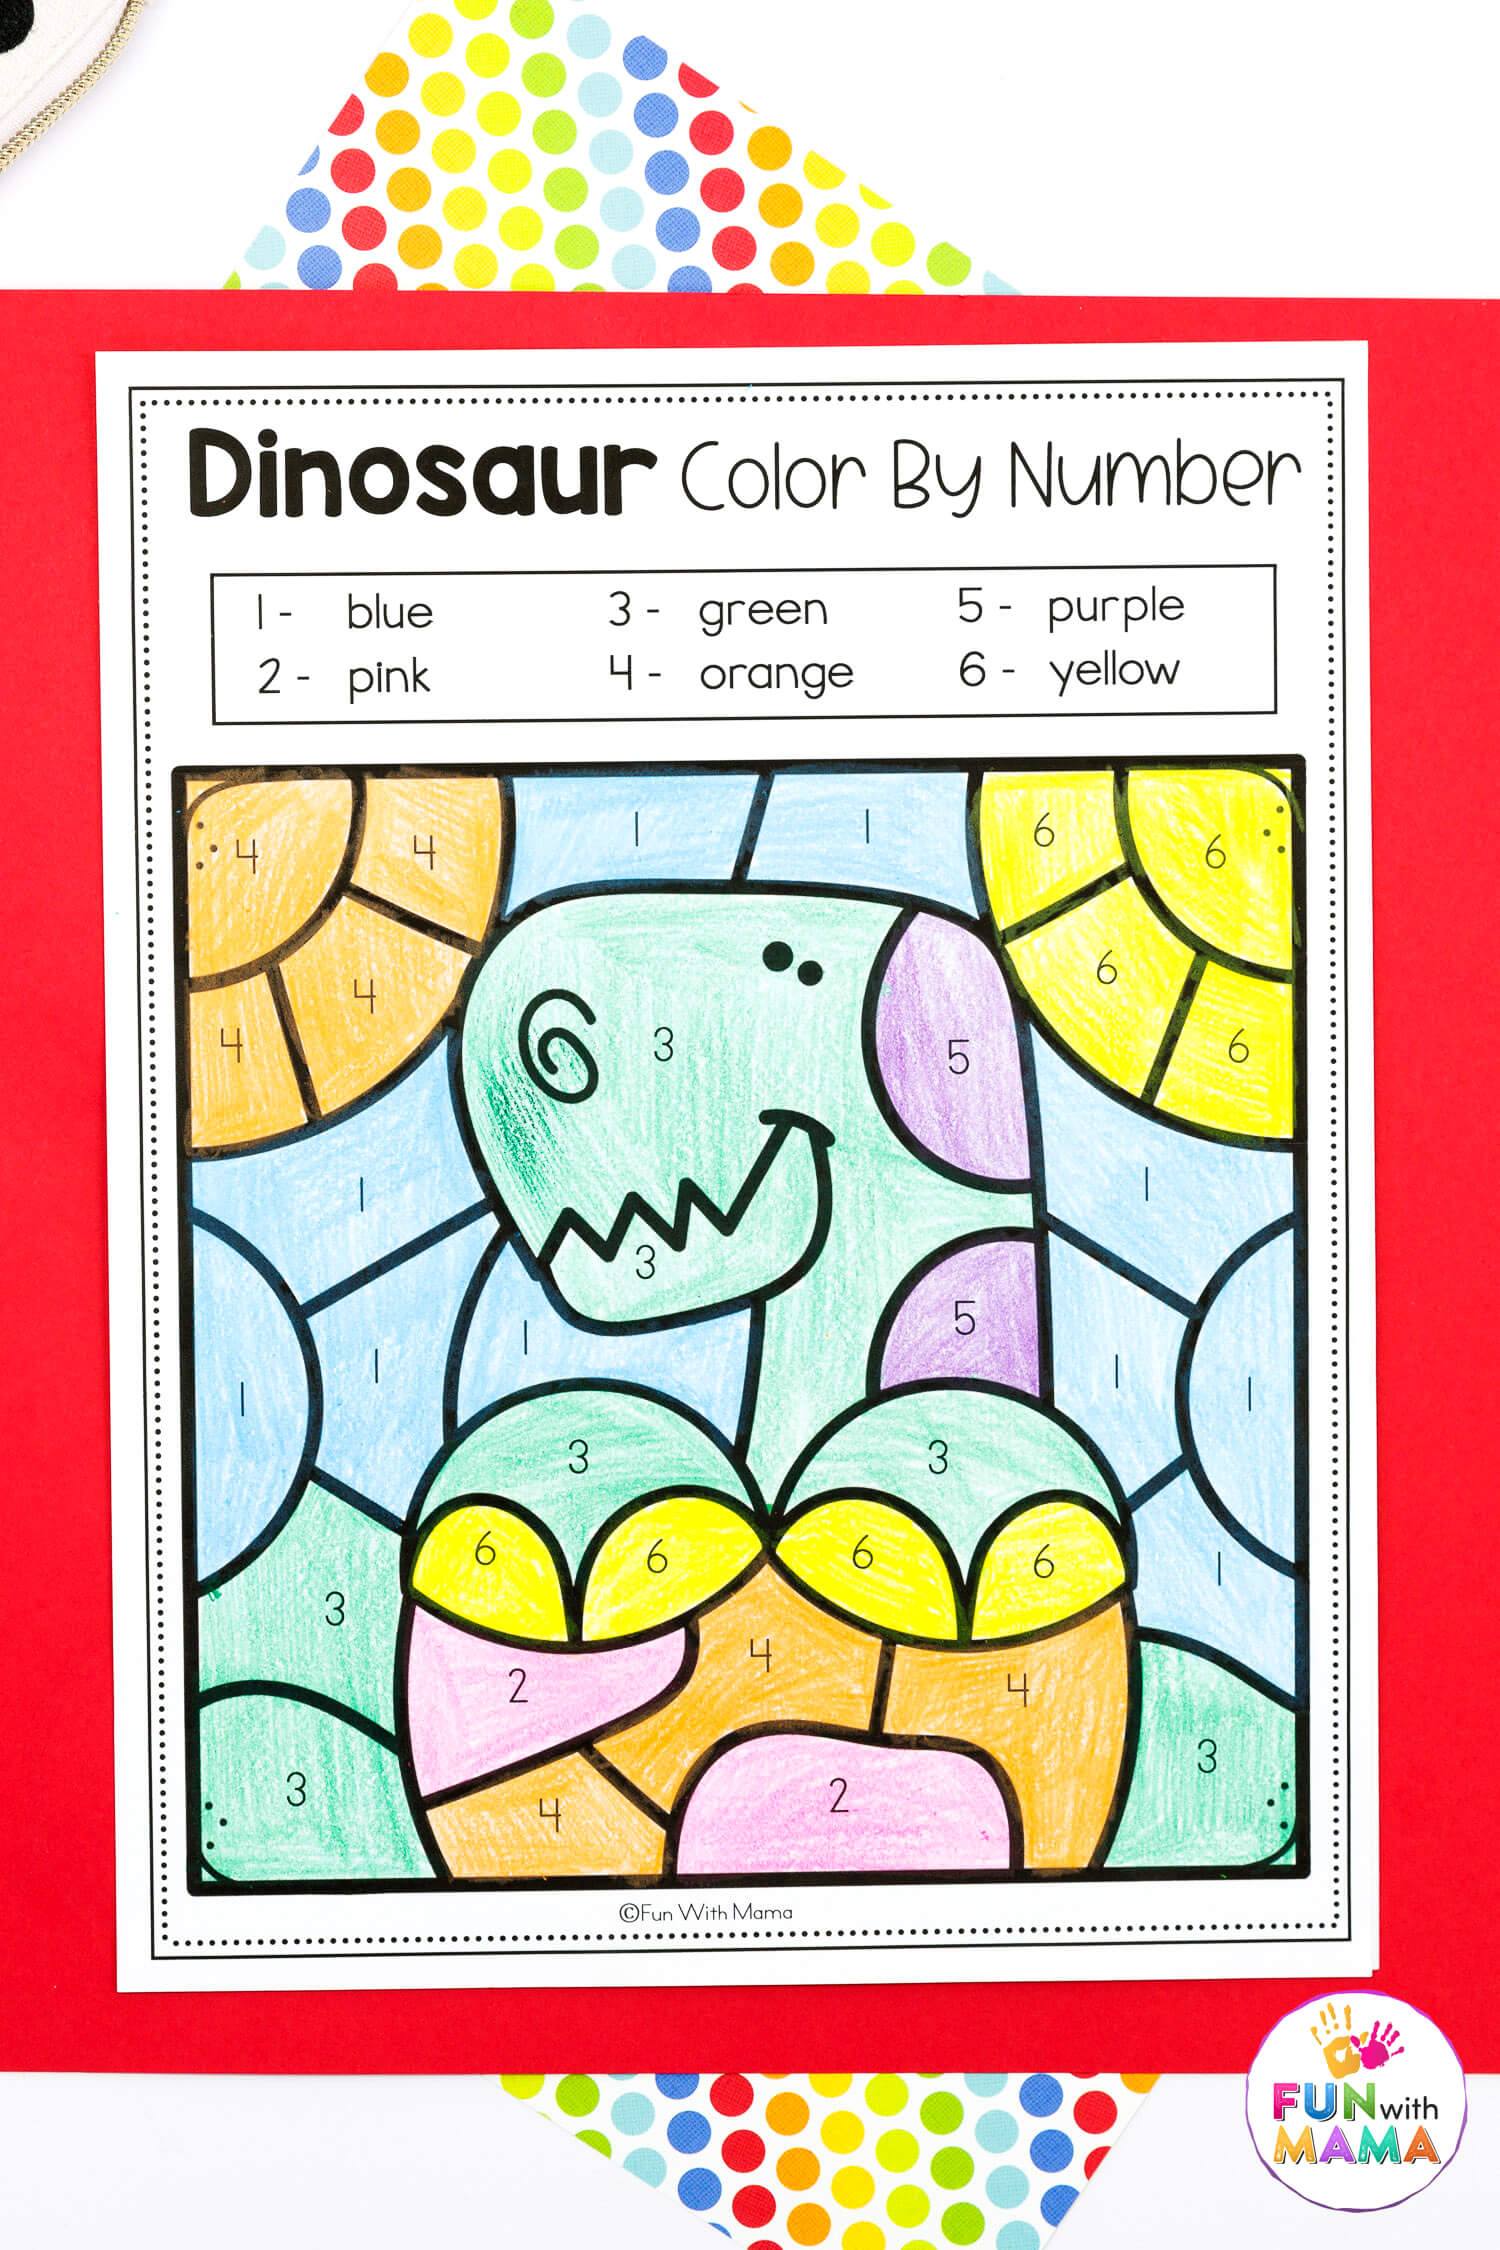 dinosaur color by number filled in with 6 different crayon colors